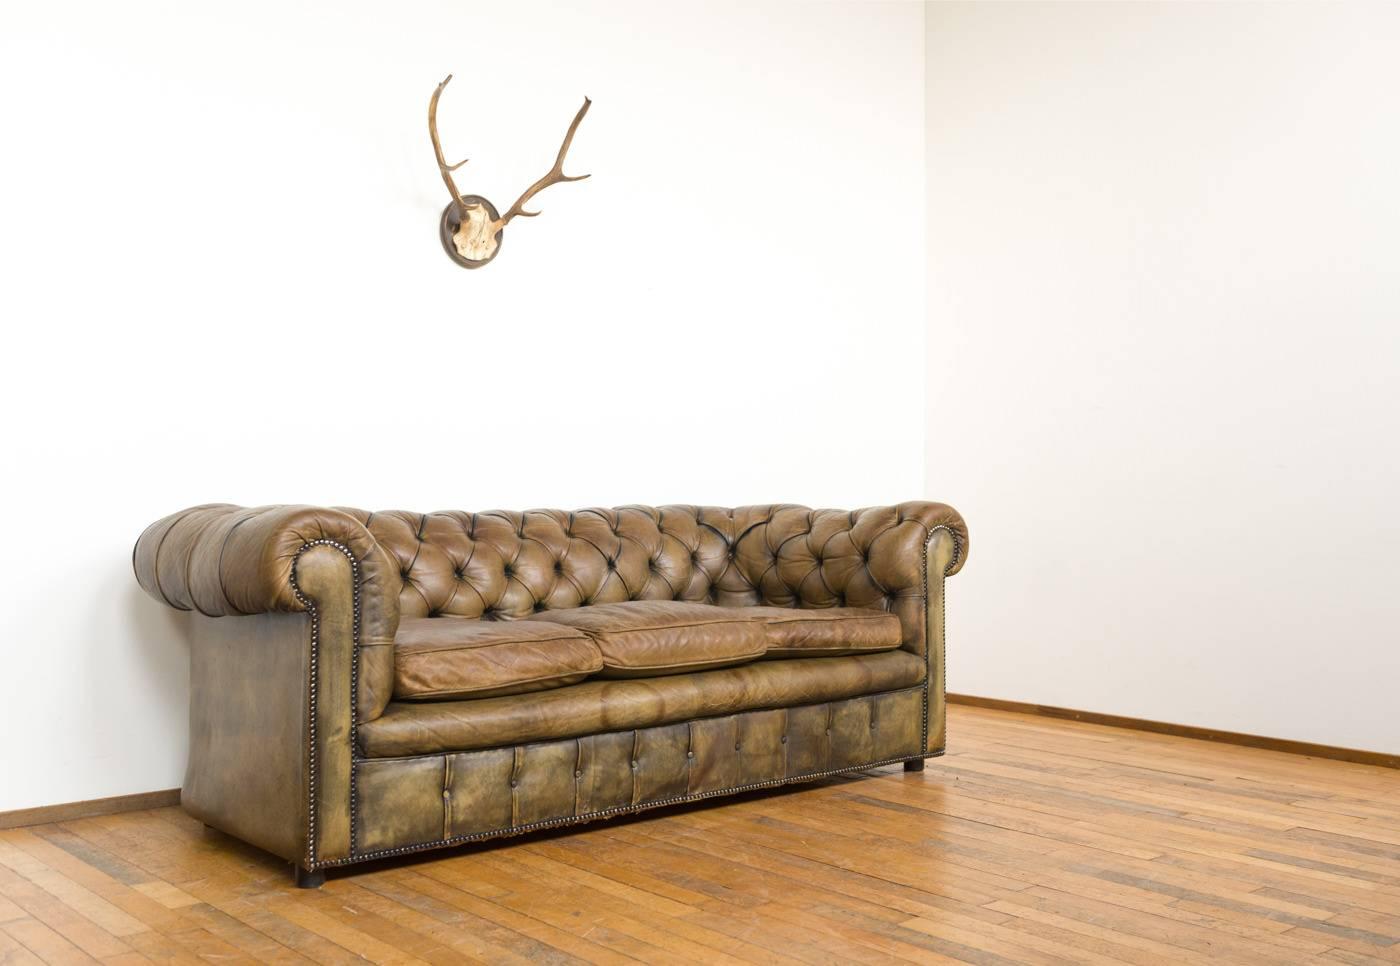 This Chesterfield was made in 1950s/1960s. The leather was hand-dyed which gives the sofa a beautiful gradation of colours, from dark brown in the folds to an olive green color on lighter places. The leather has gotten a beautiful patina over the